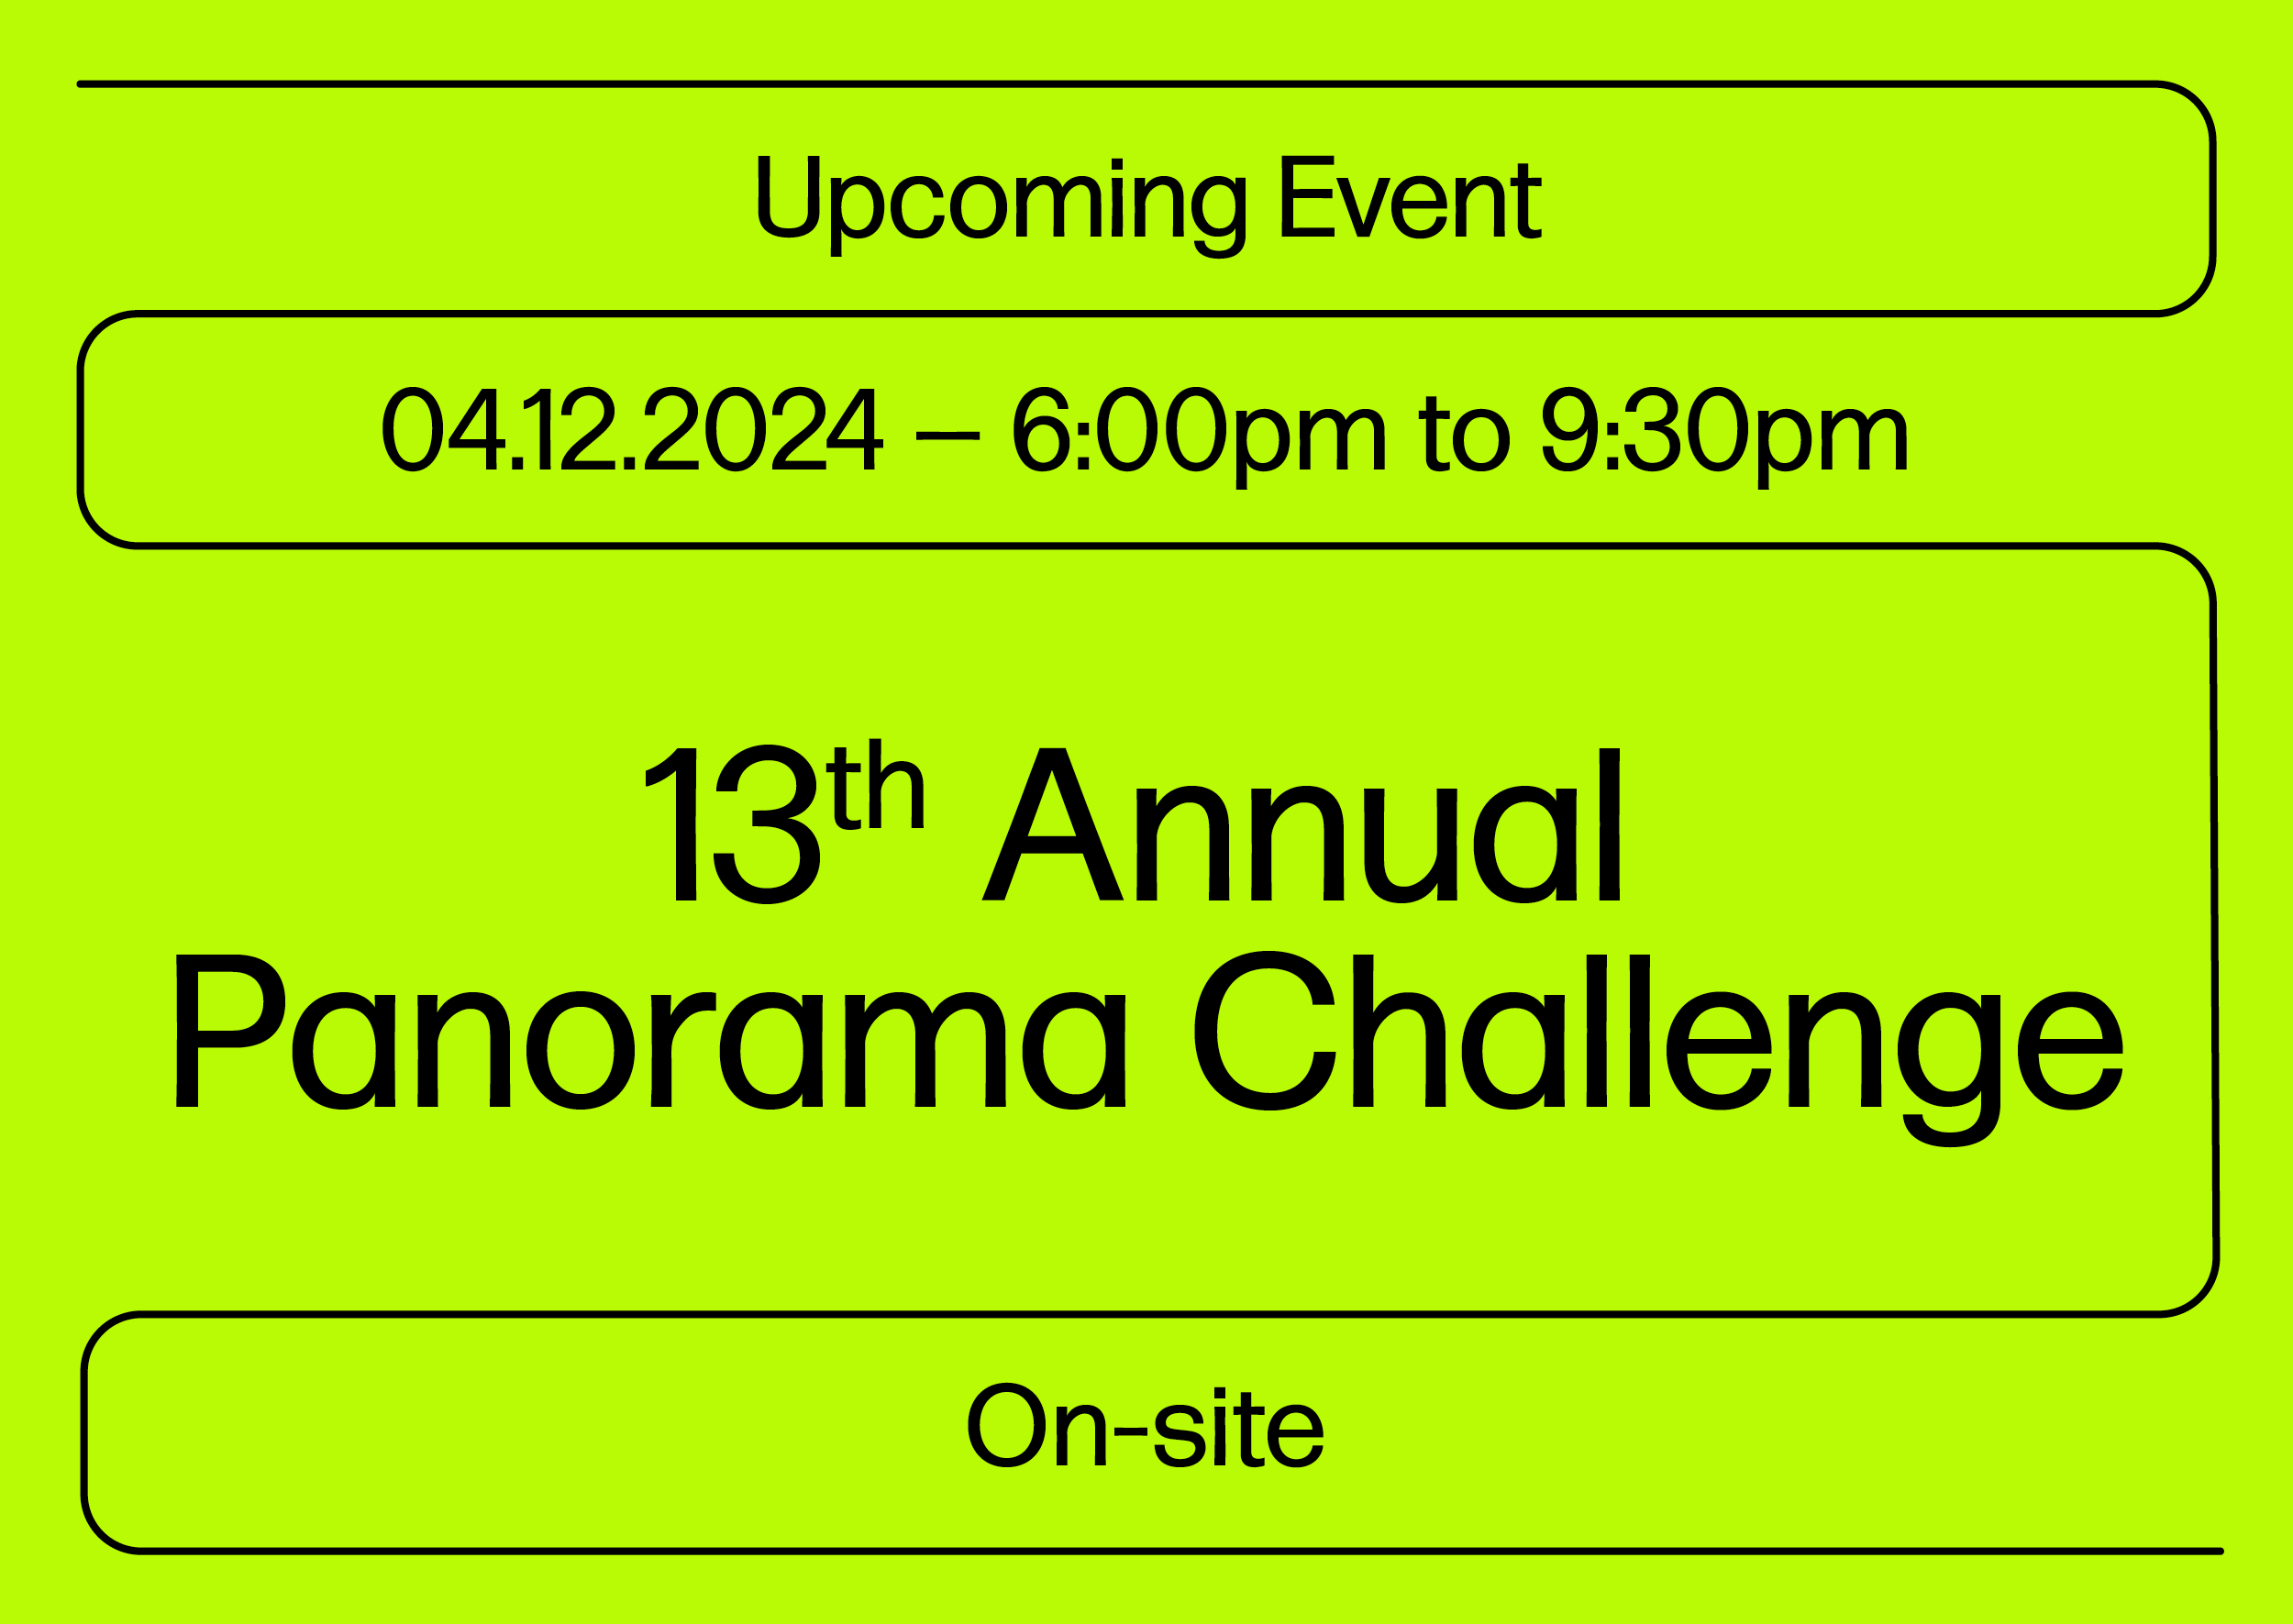 Text that reads Upcoming Event, April 12 2024, 6 to 9:30pm, 13th Annual Panorama Challenge, On-site